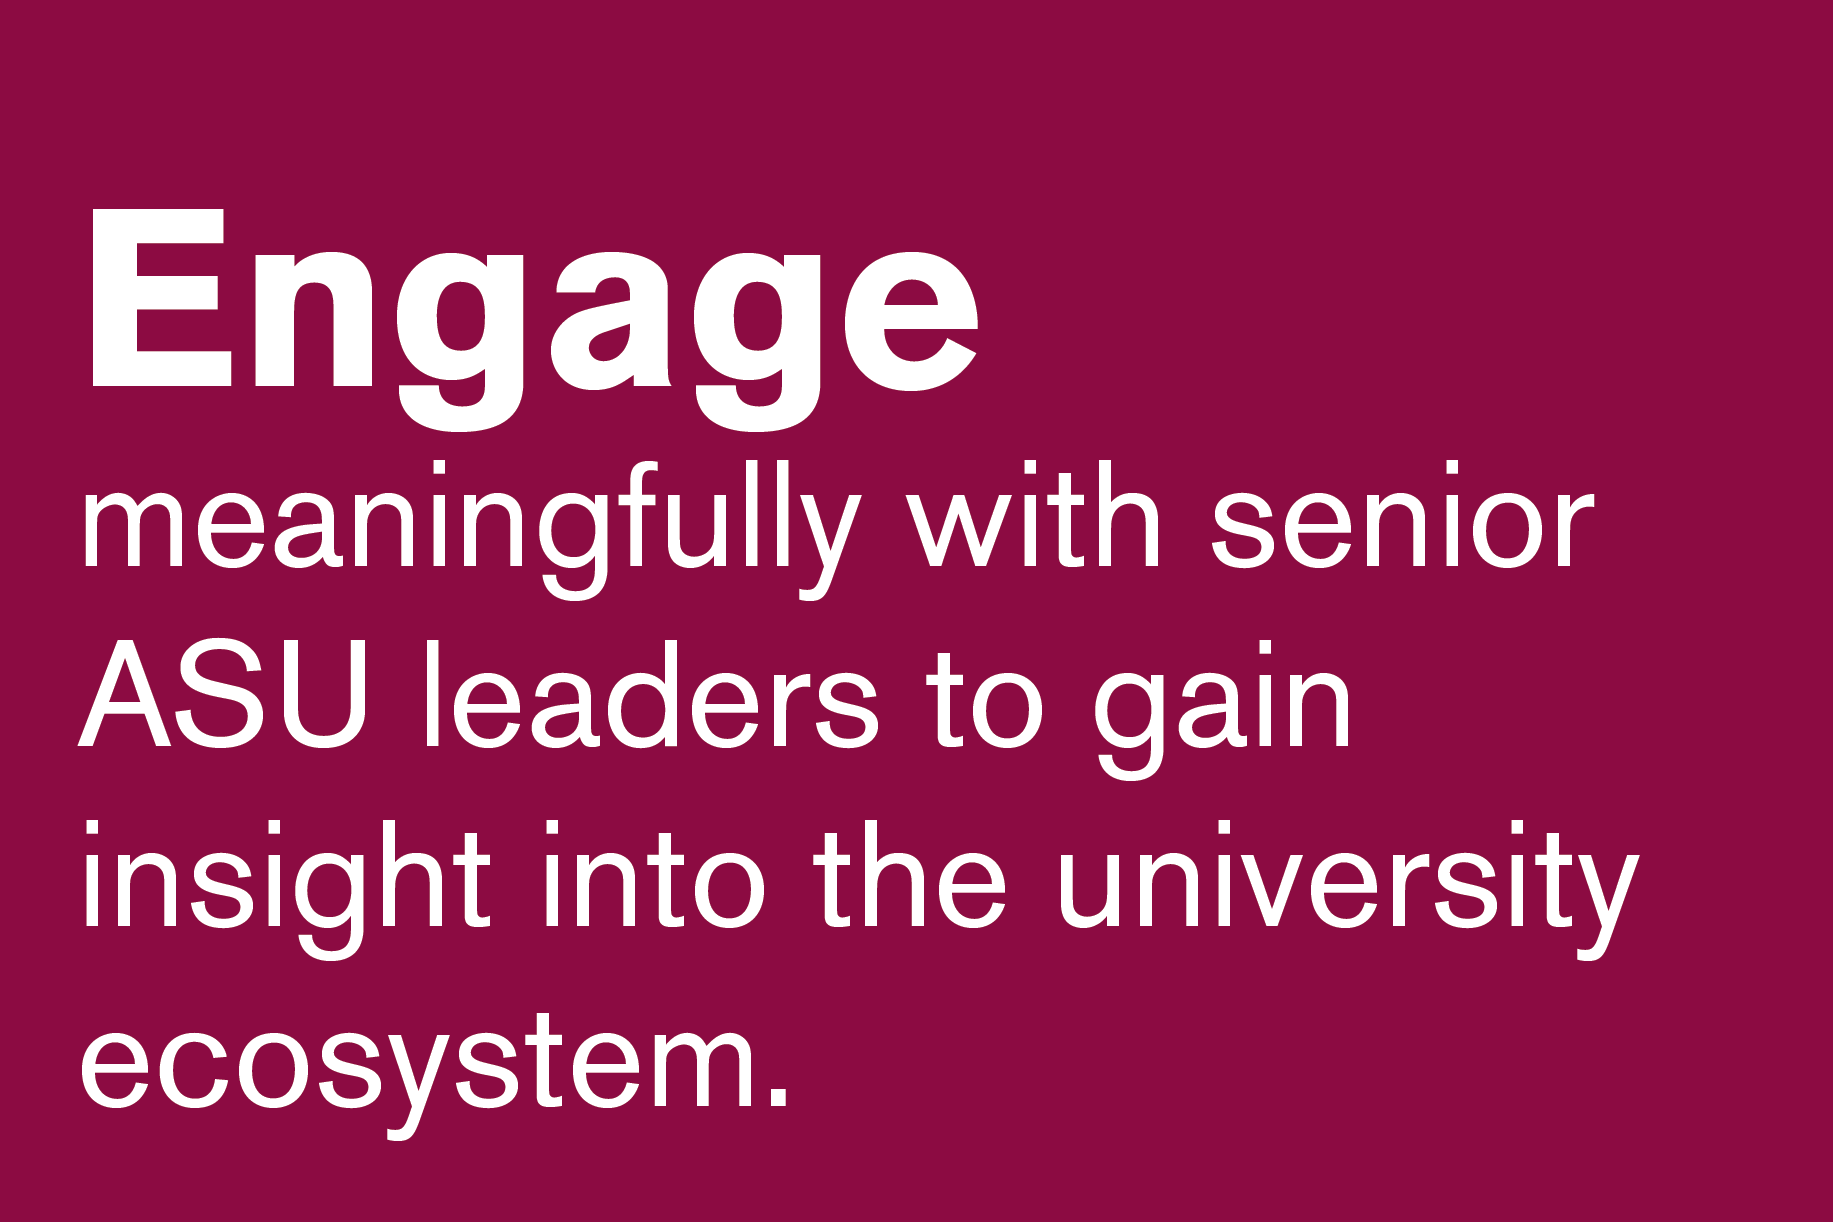 Engage meaningfully with senior ASU leaders to gain insight into the university ecosystem.